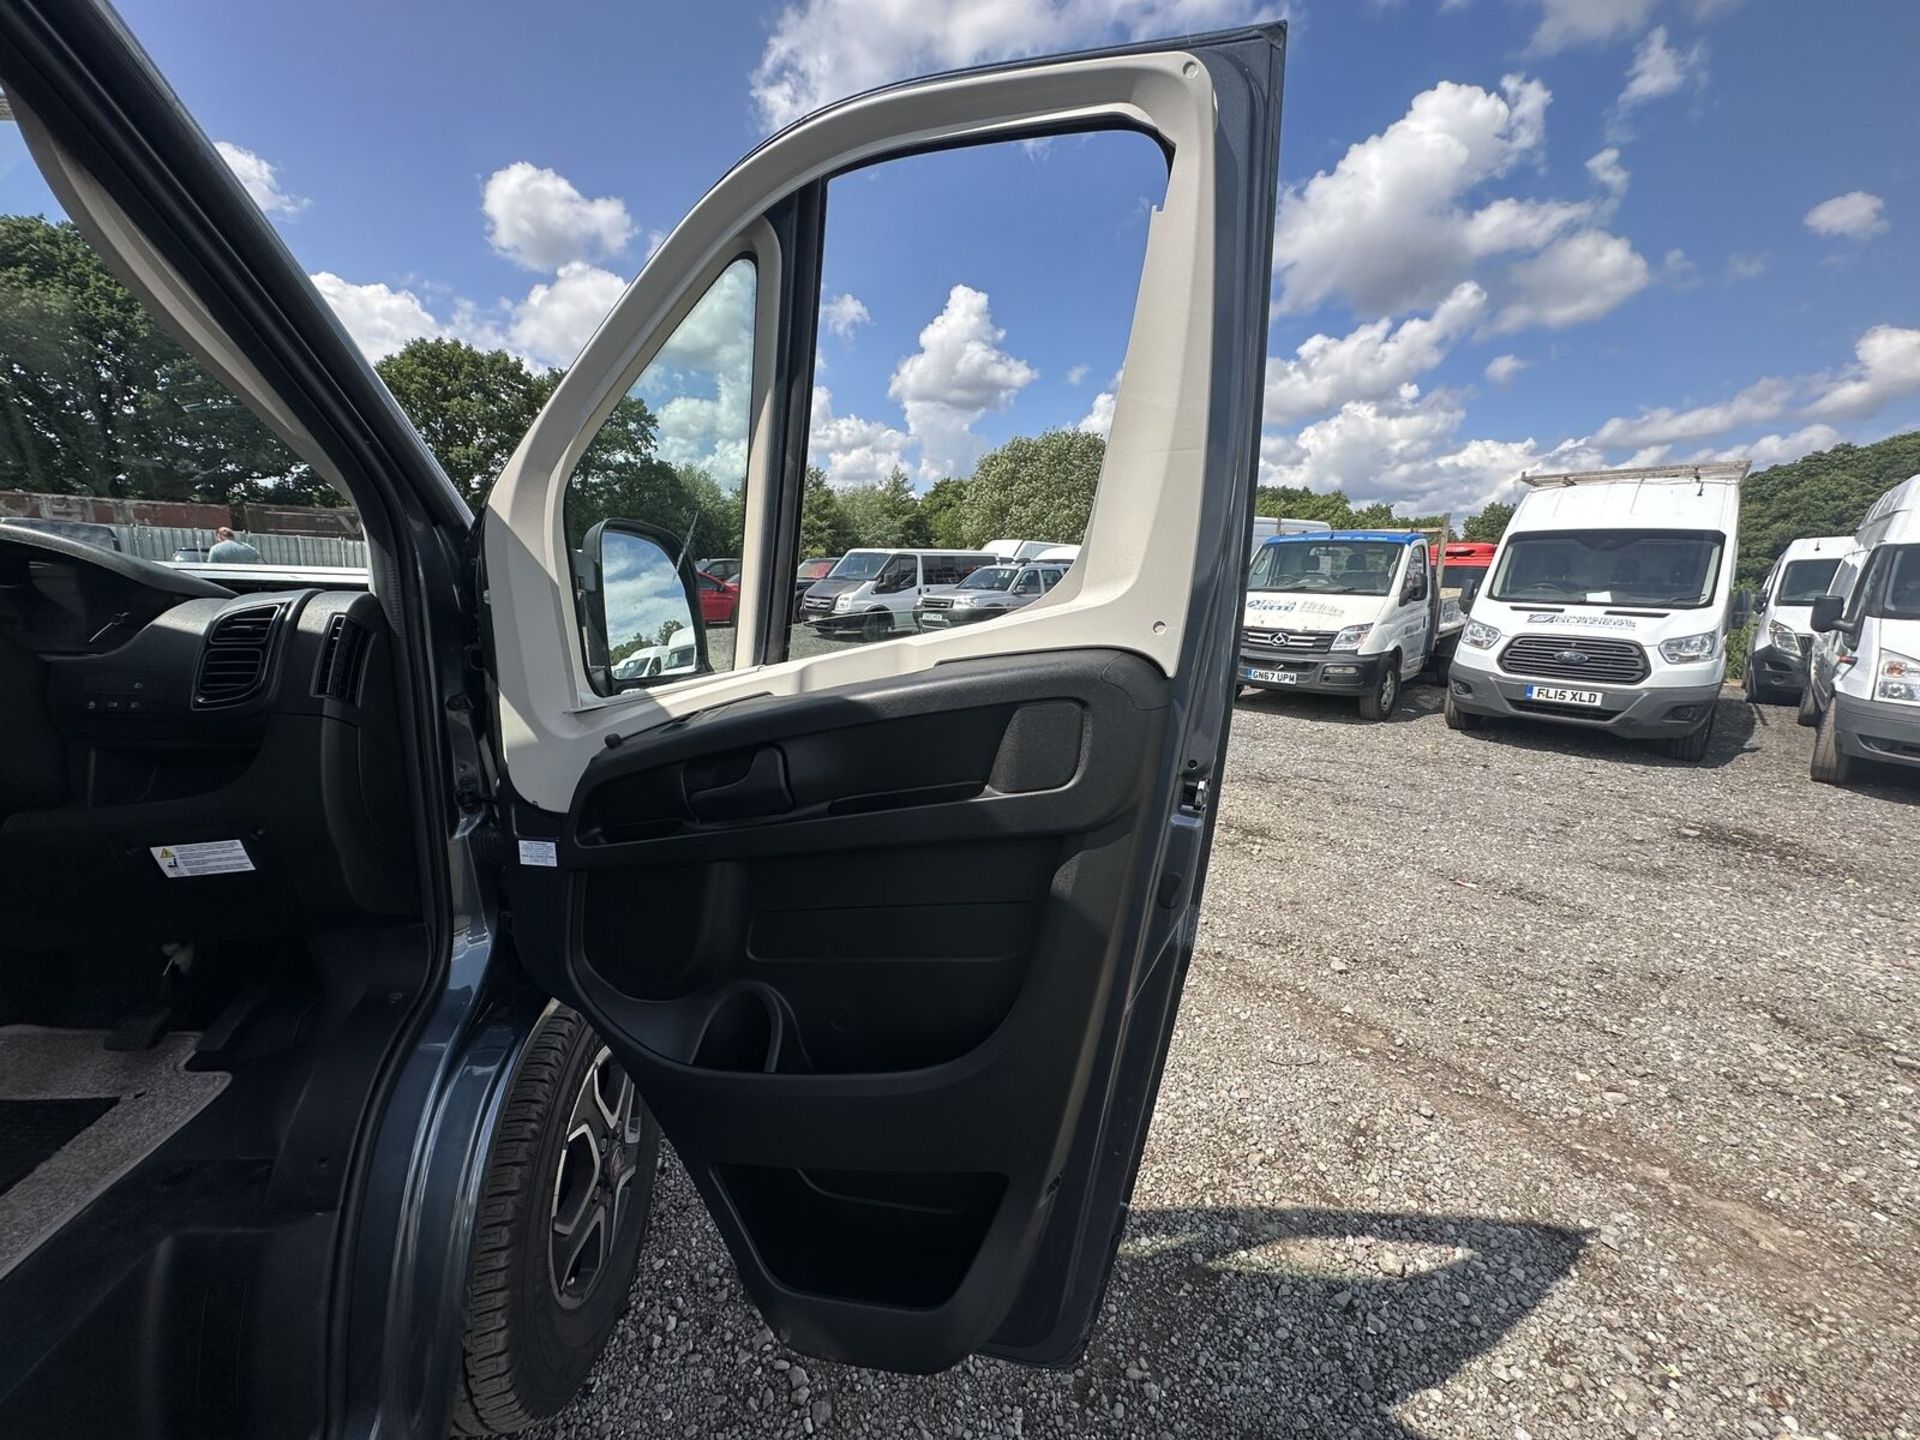 COMFORT CRUSADER: FIAT DUCATO SWIFT ESCAPE 674 WITH LUXURIOUS FEATURES - Image 18 of 18